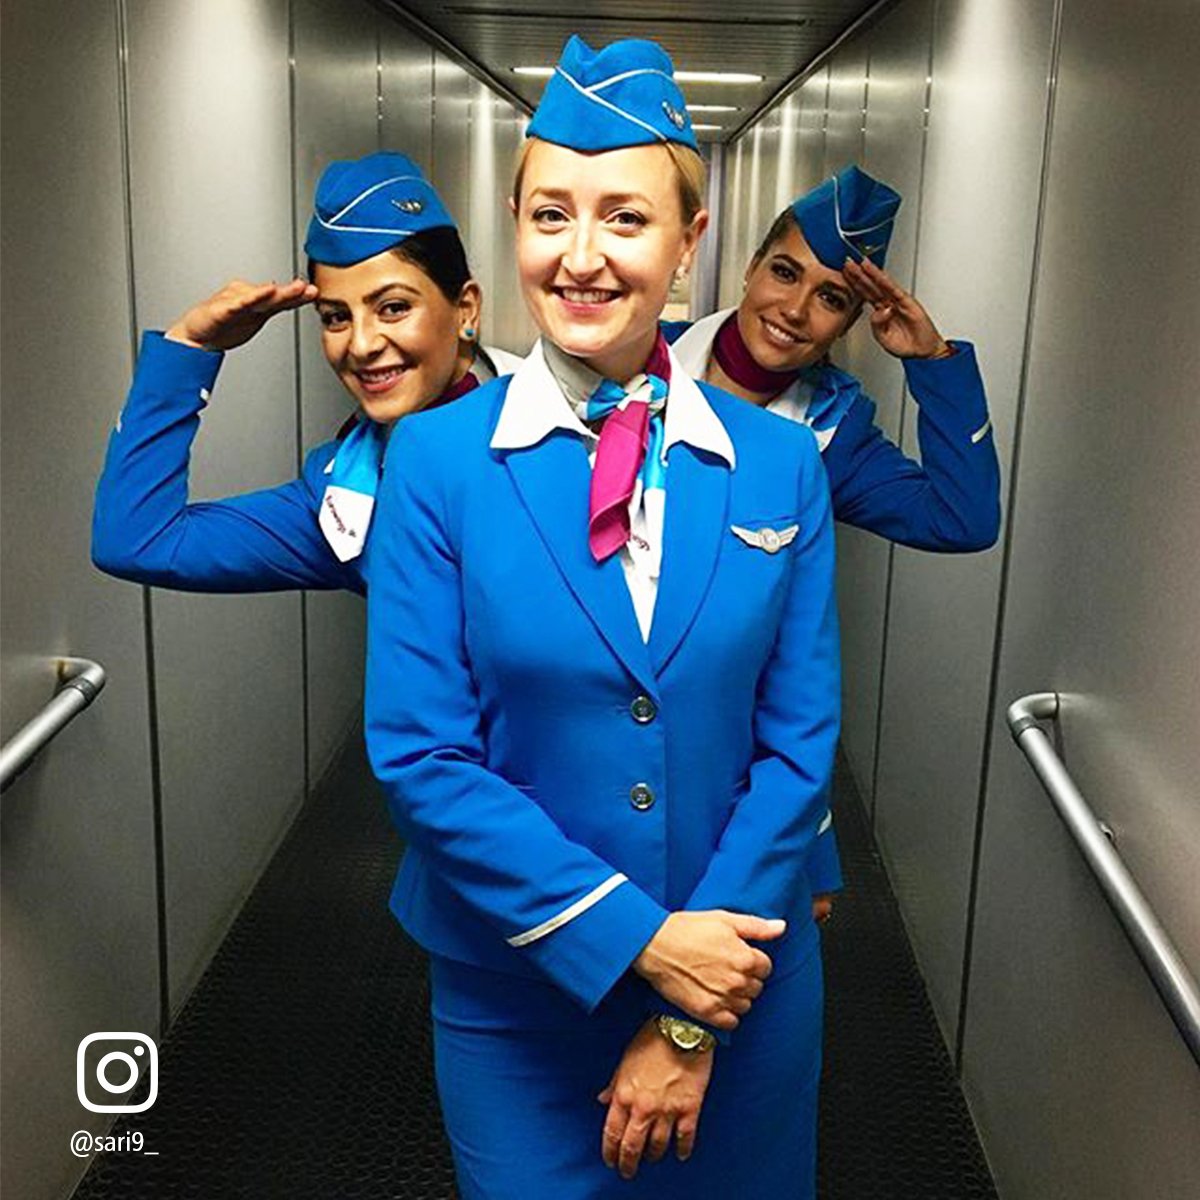 Eurowings on X: "Our flight attendants are ready to take on 2018 - are  you?! 🤗 #MondayMotivation https://t.co/Xjl5VIJGVj" / X